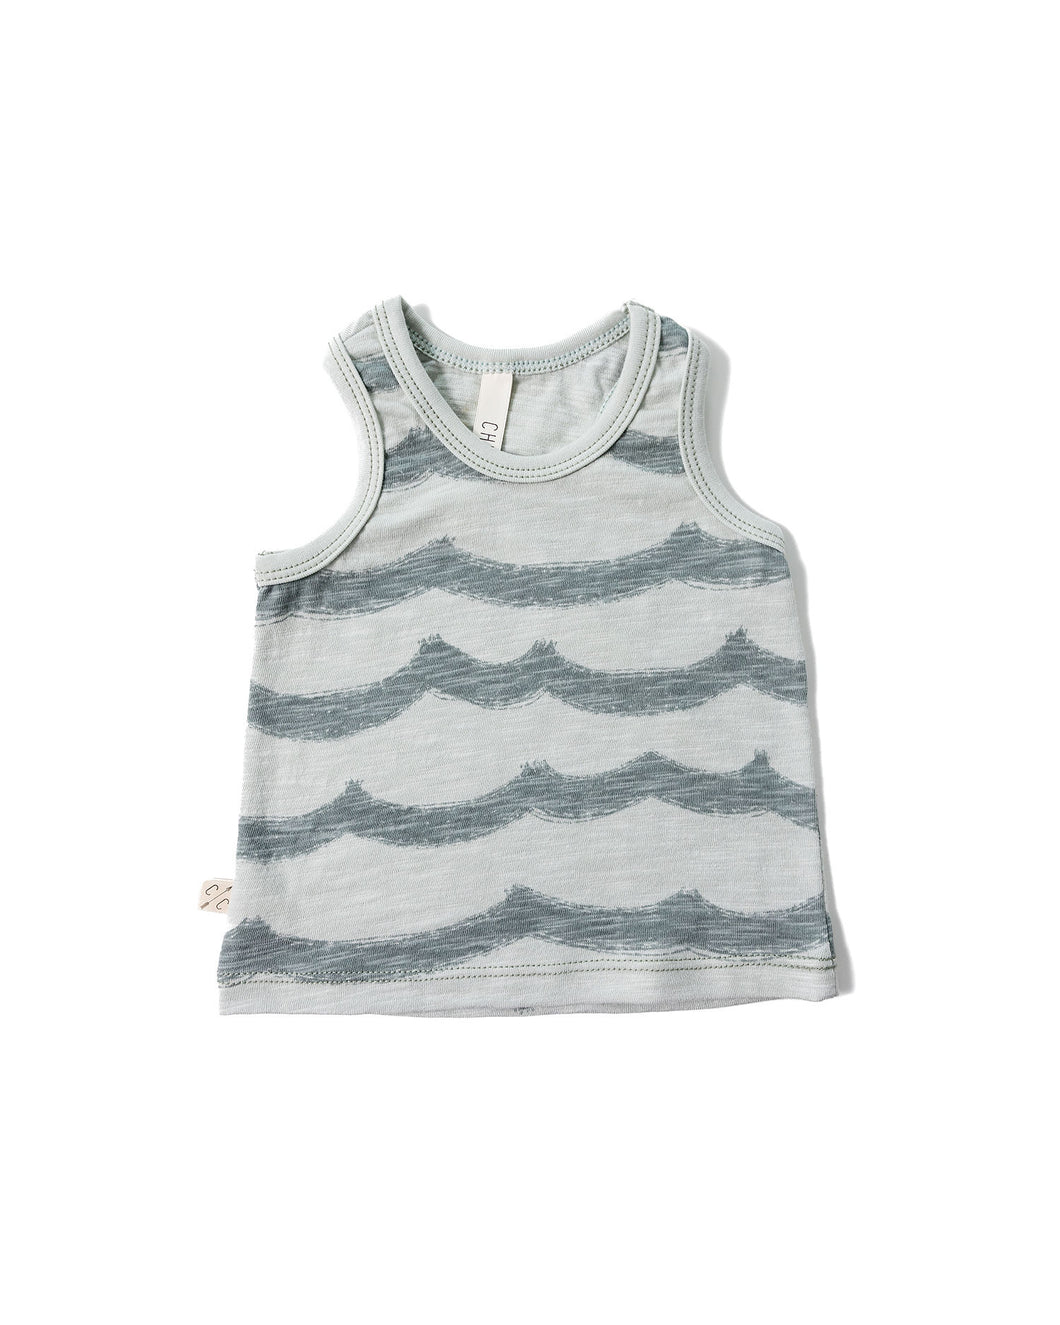 ringer tank top - waves on mineral